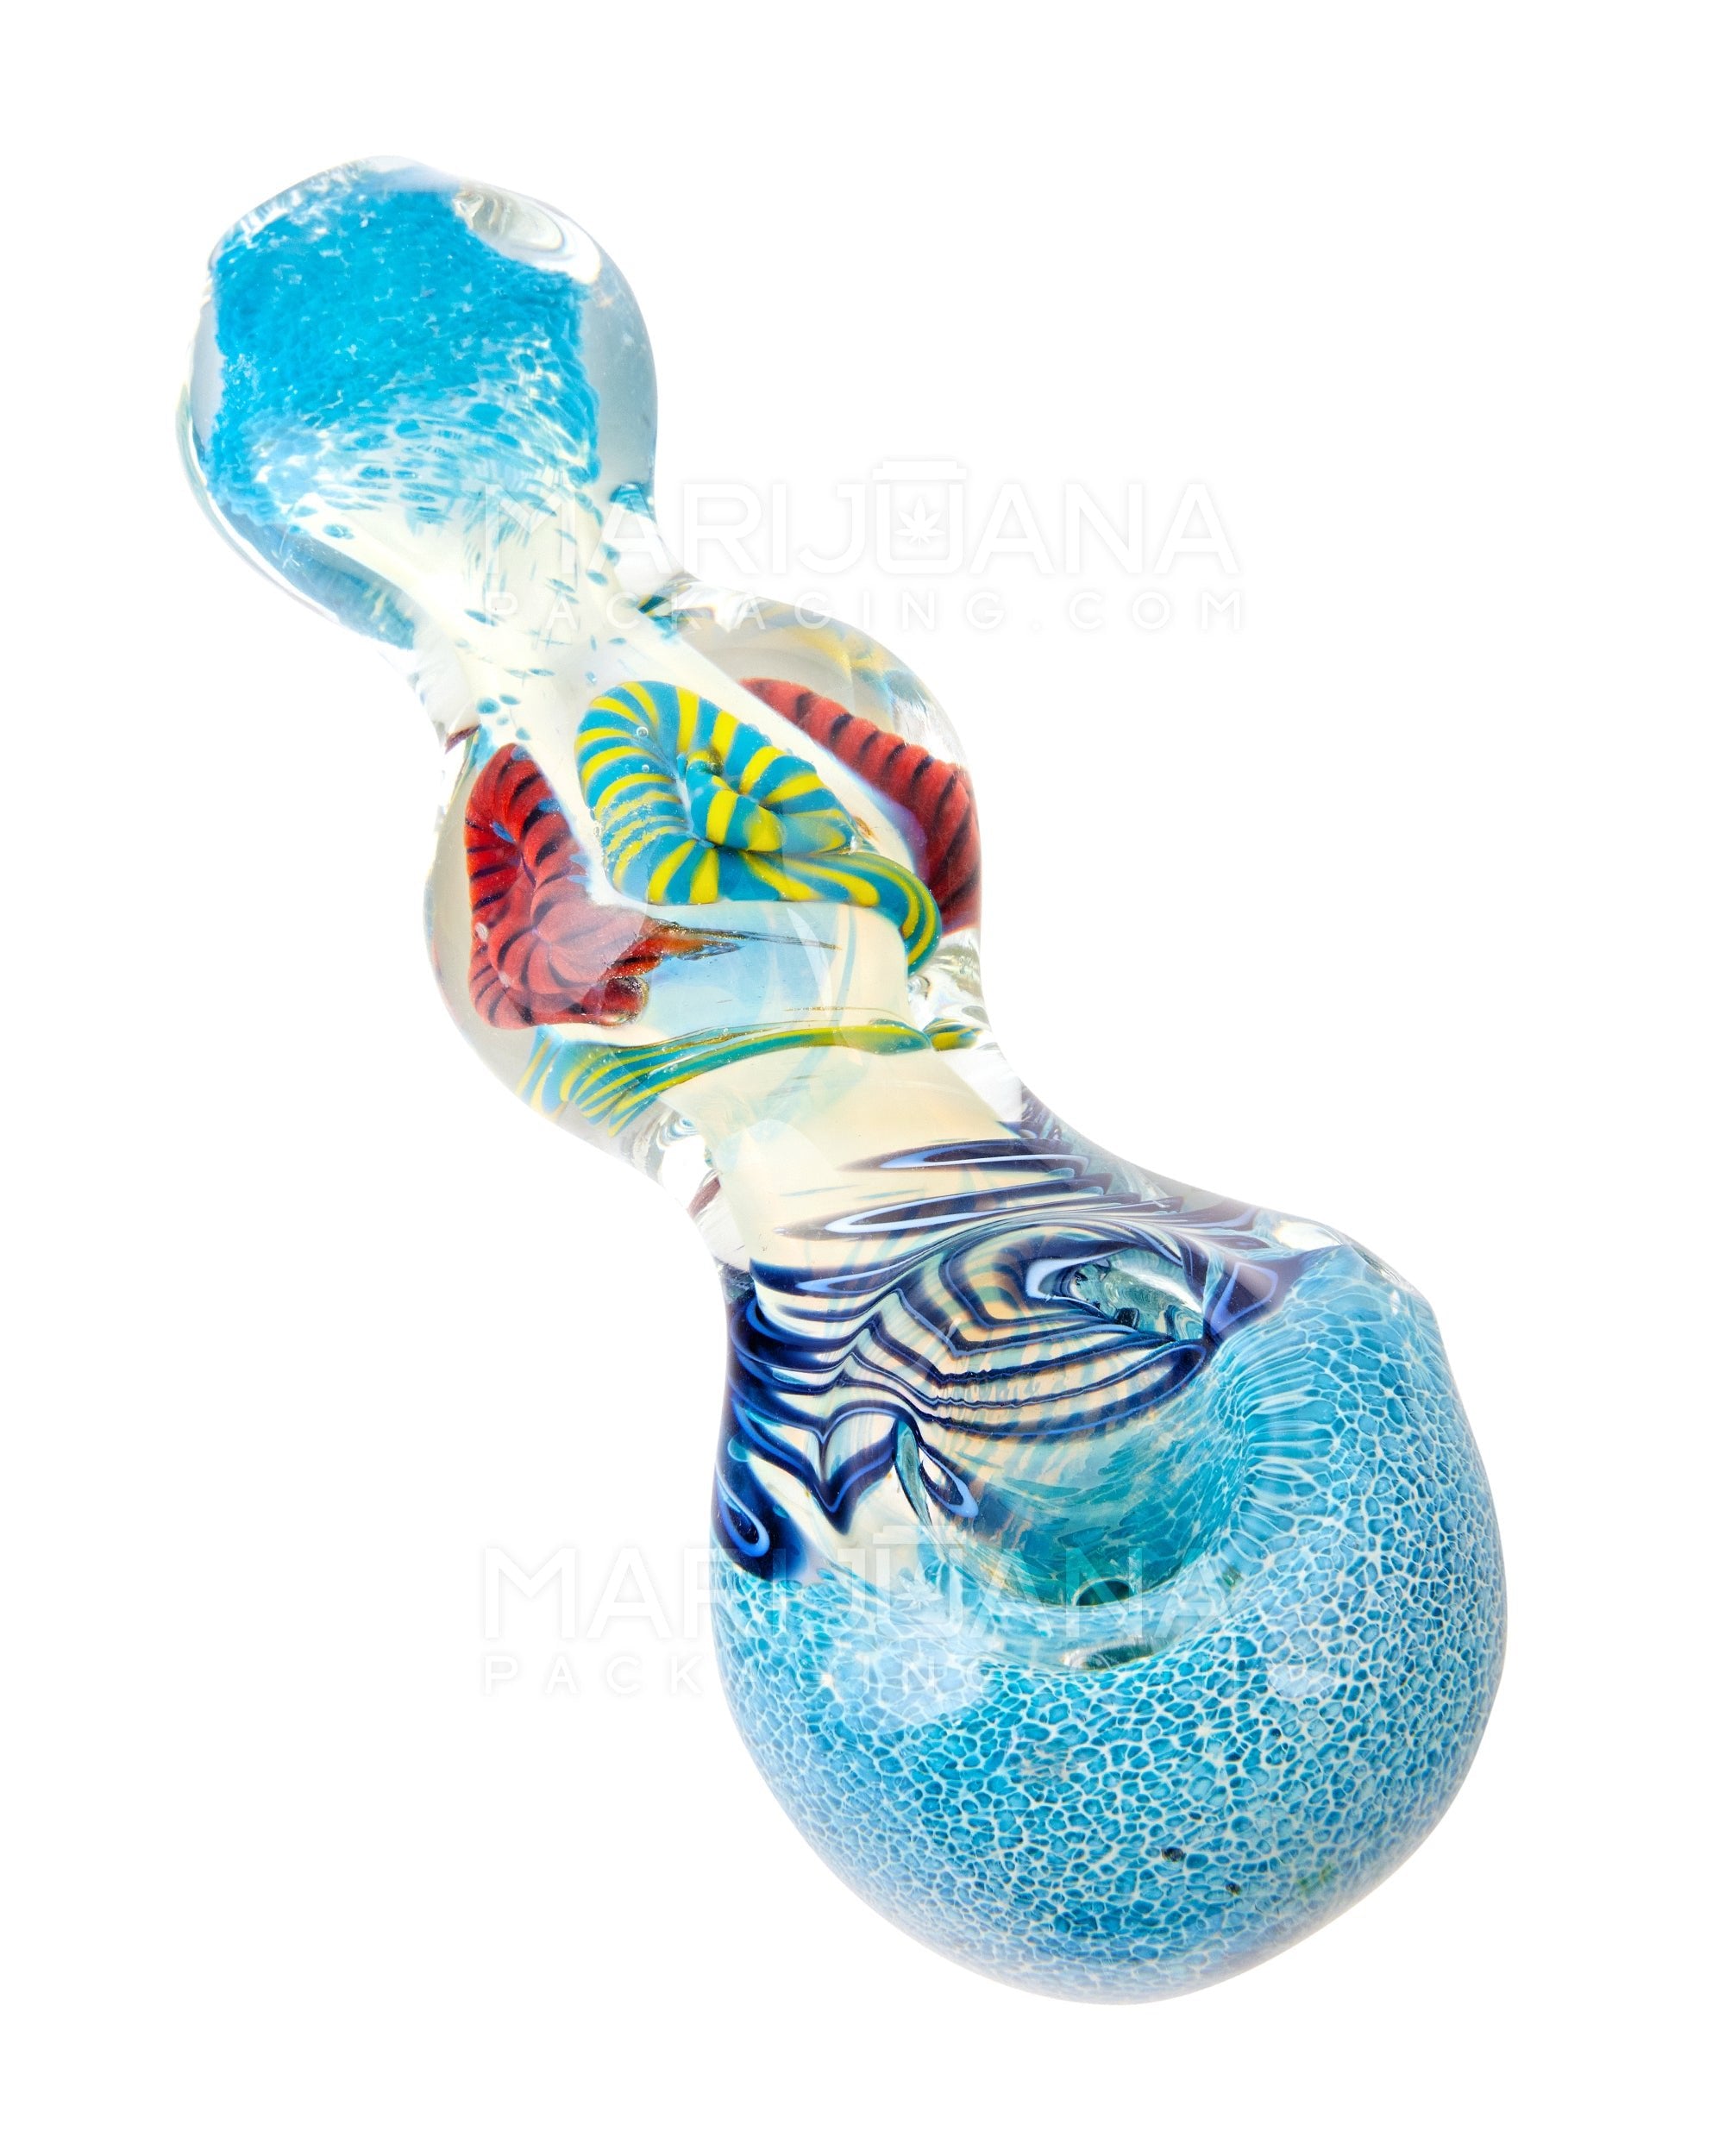 Frit & Fumed Spoon Hand Pipe w/ Ribboning | 4.5in Long - Glass - Assorted - 1